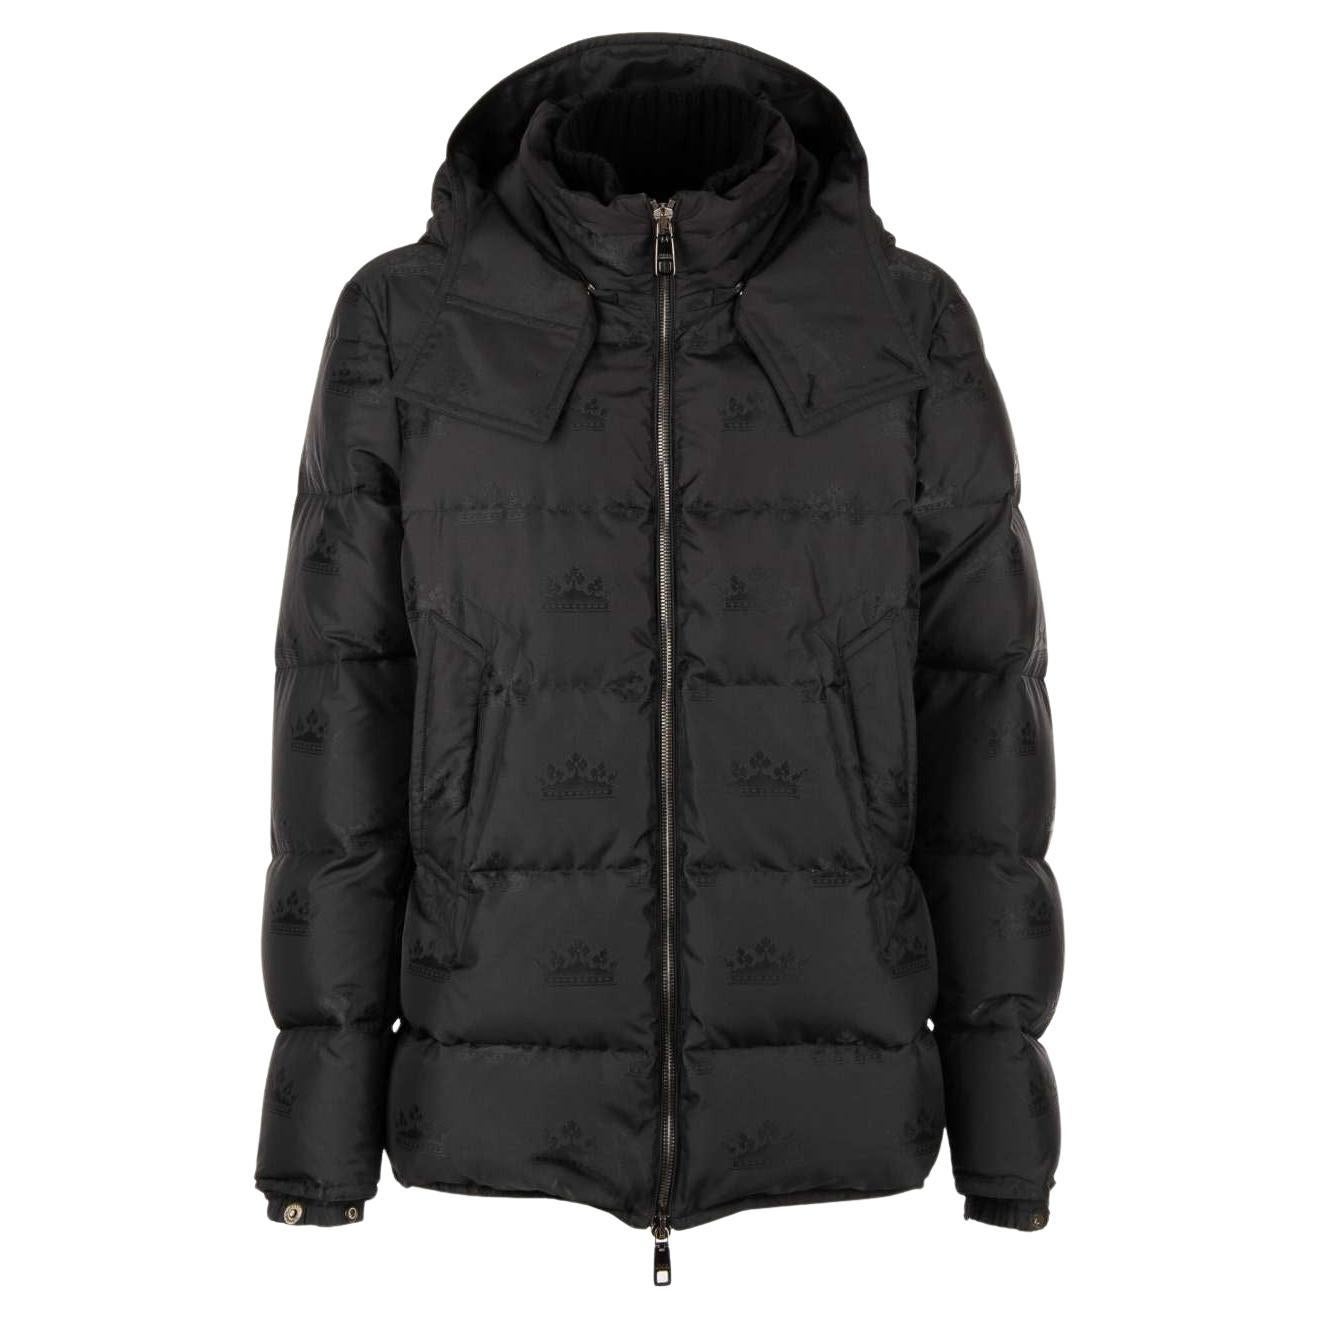 D&G Crowns Textured Hooded Down Jacket with Knit Details Black 50 M-L For Sale